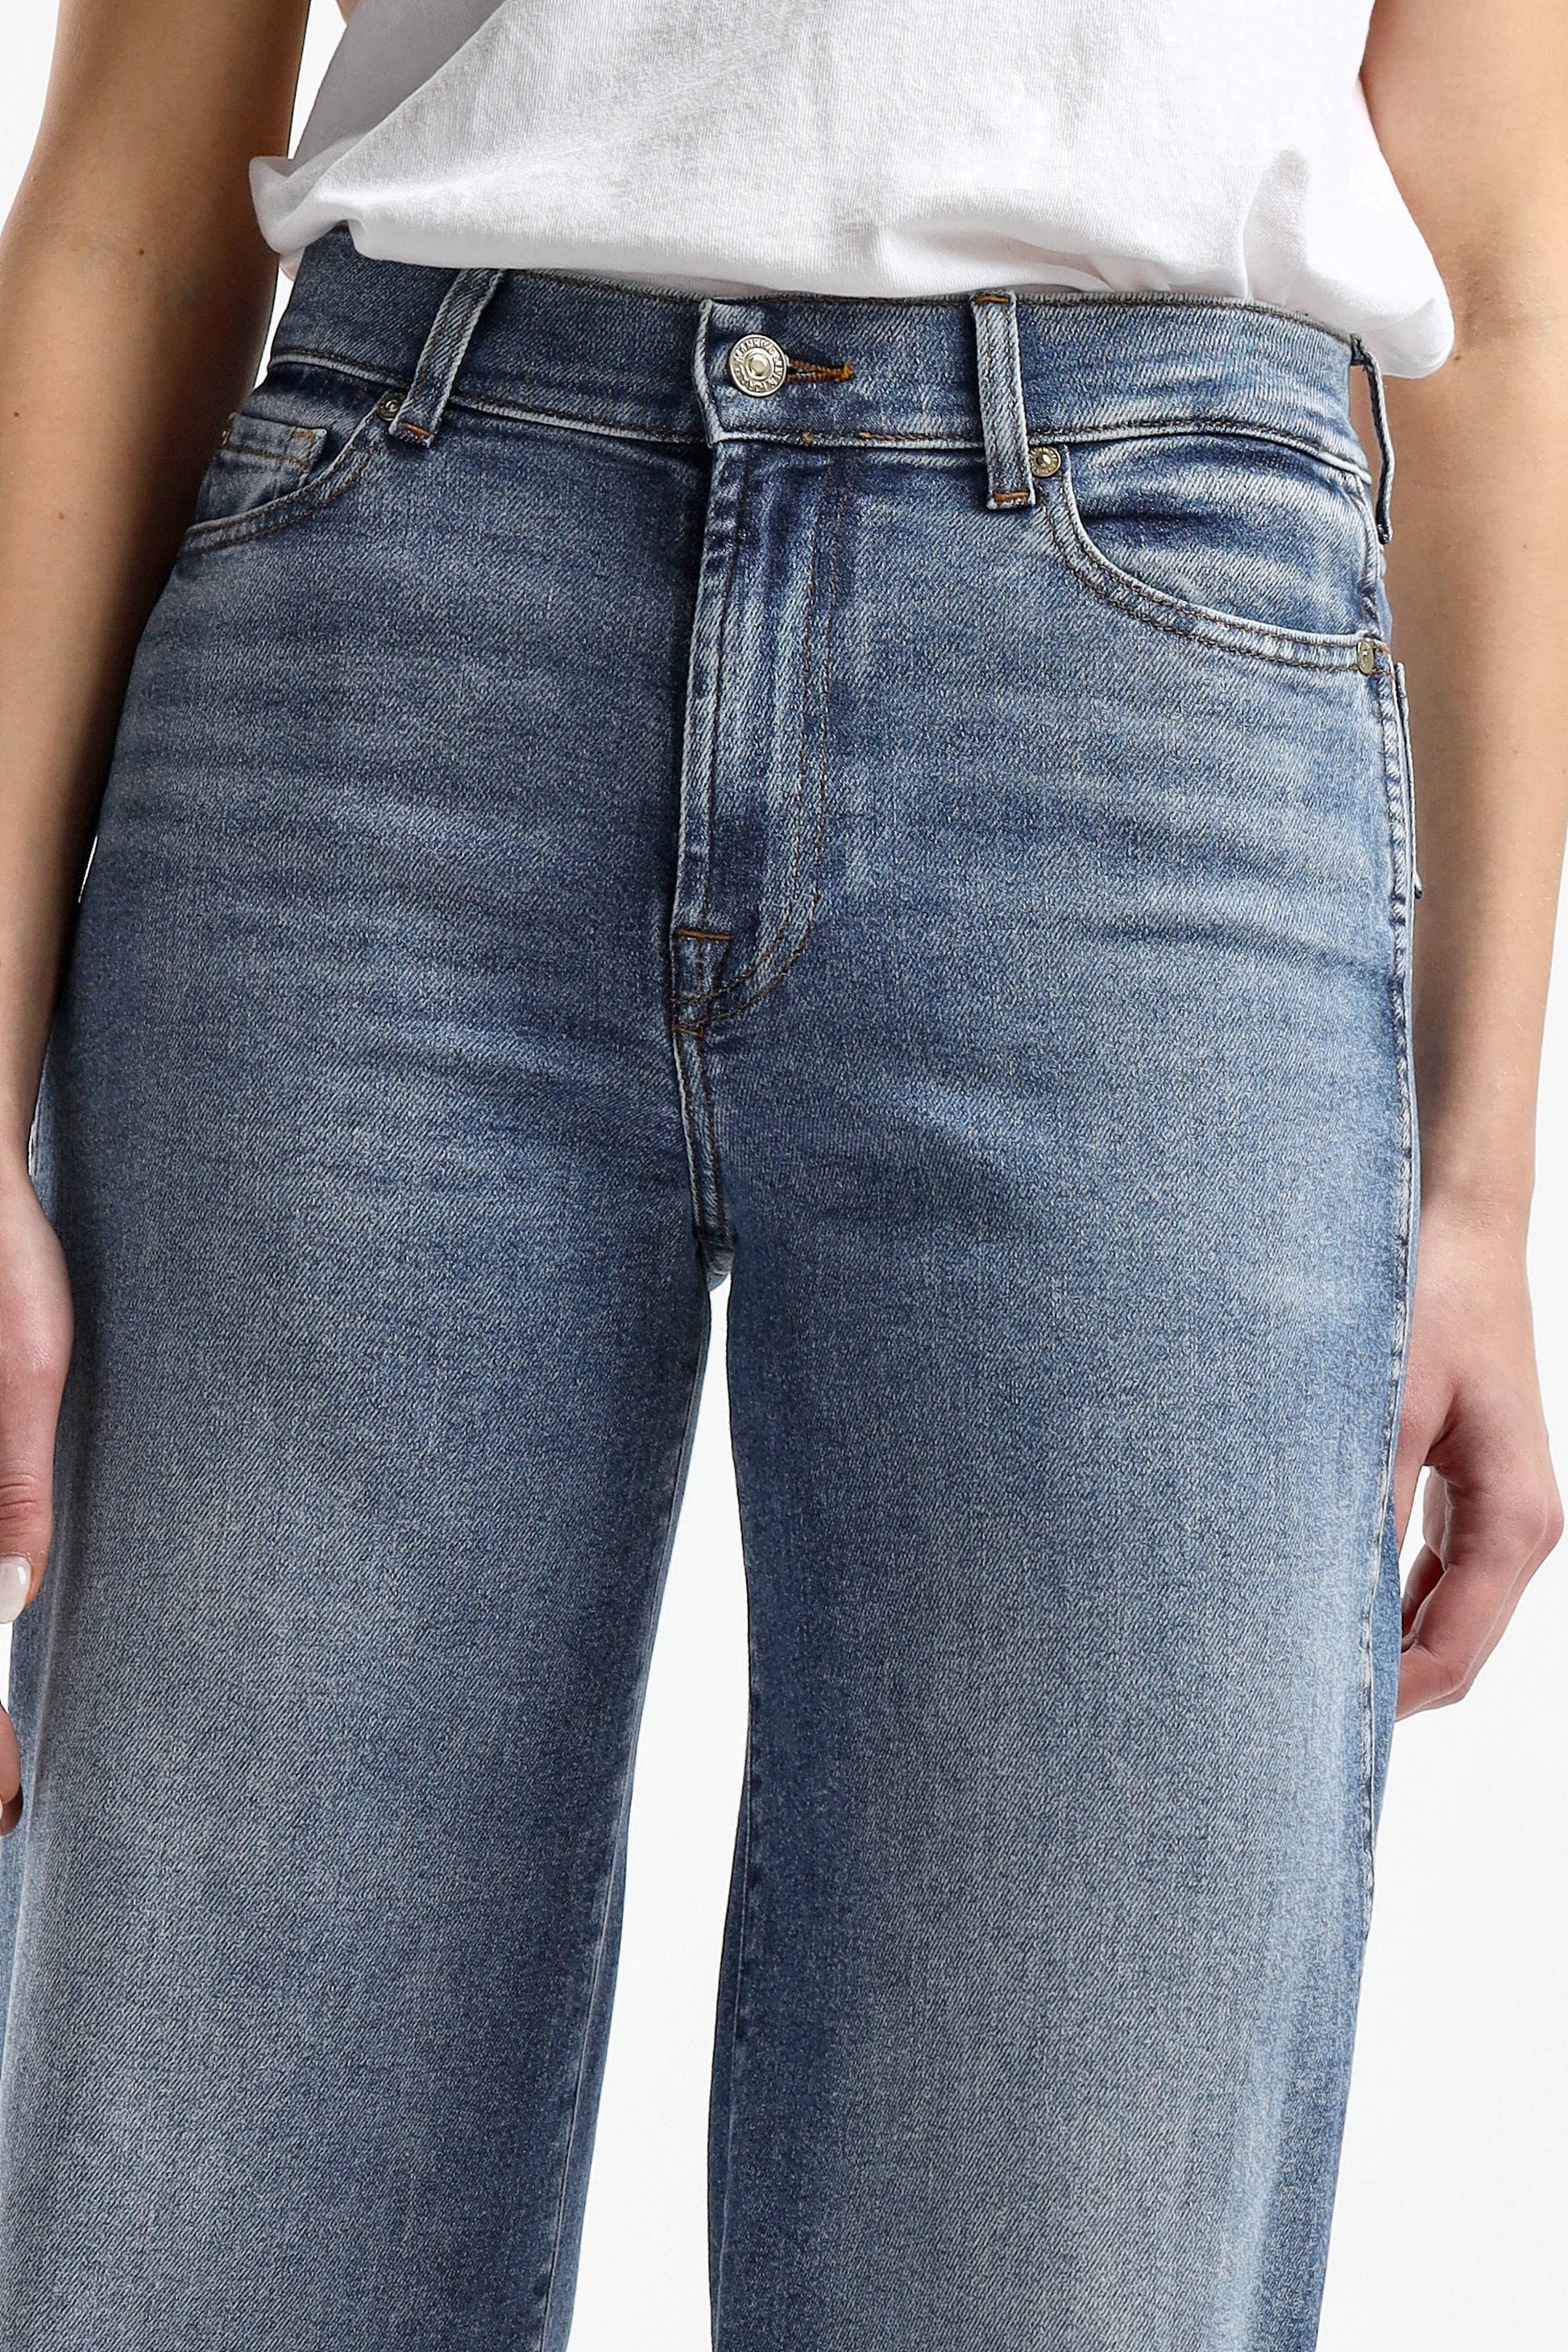 Jeans Lotta Luxe Vintage in Mid Blue7 For All Mankind - Anita Hass